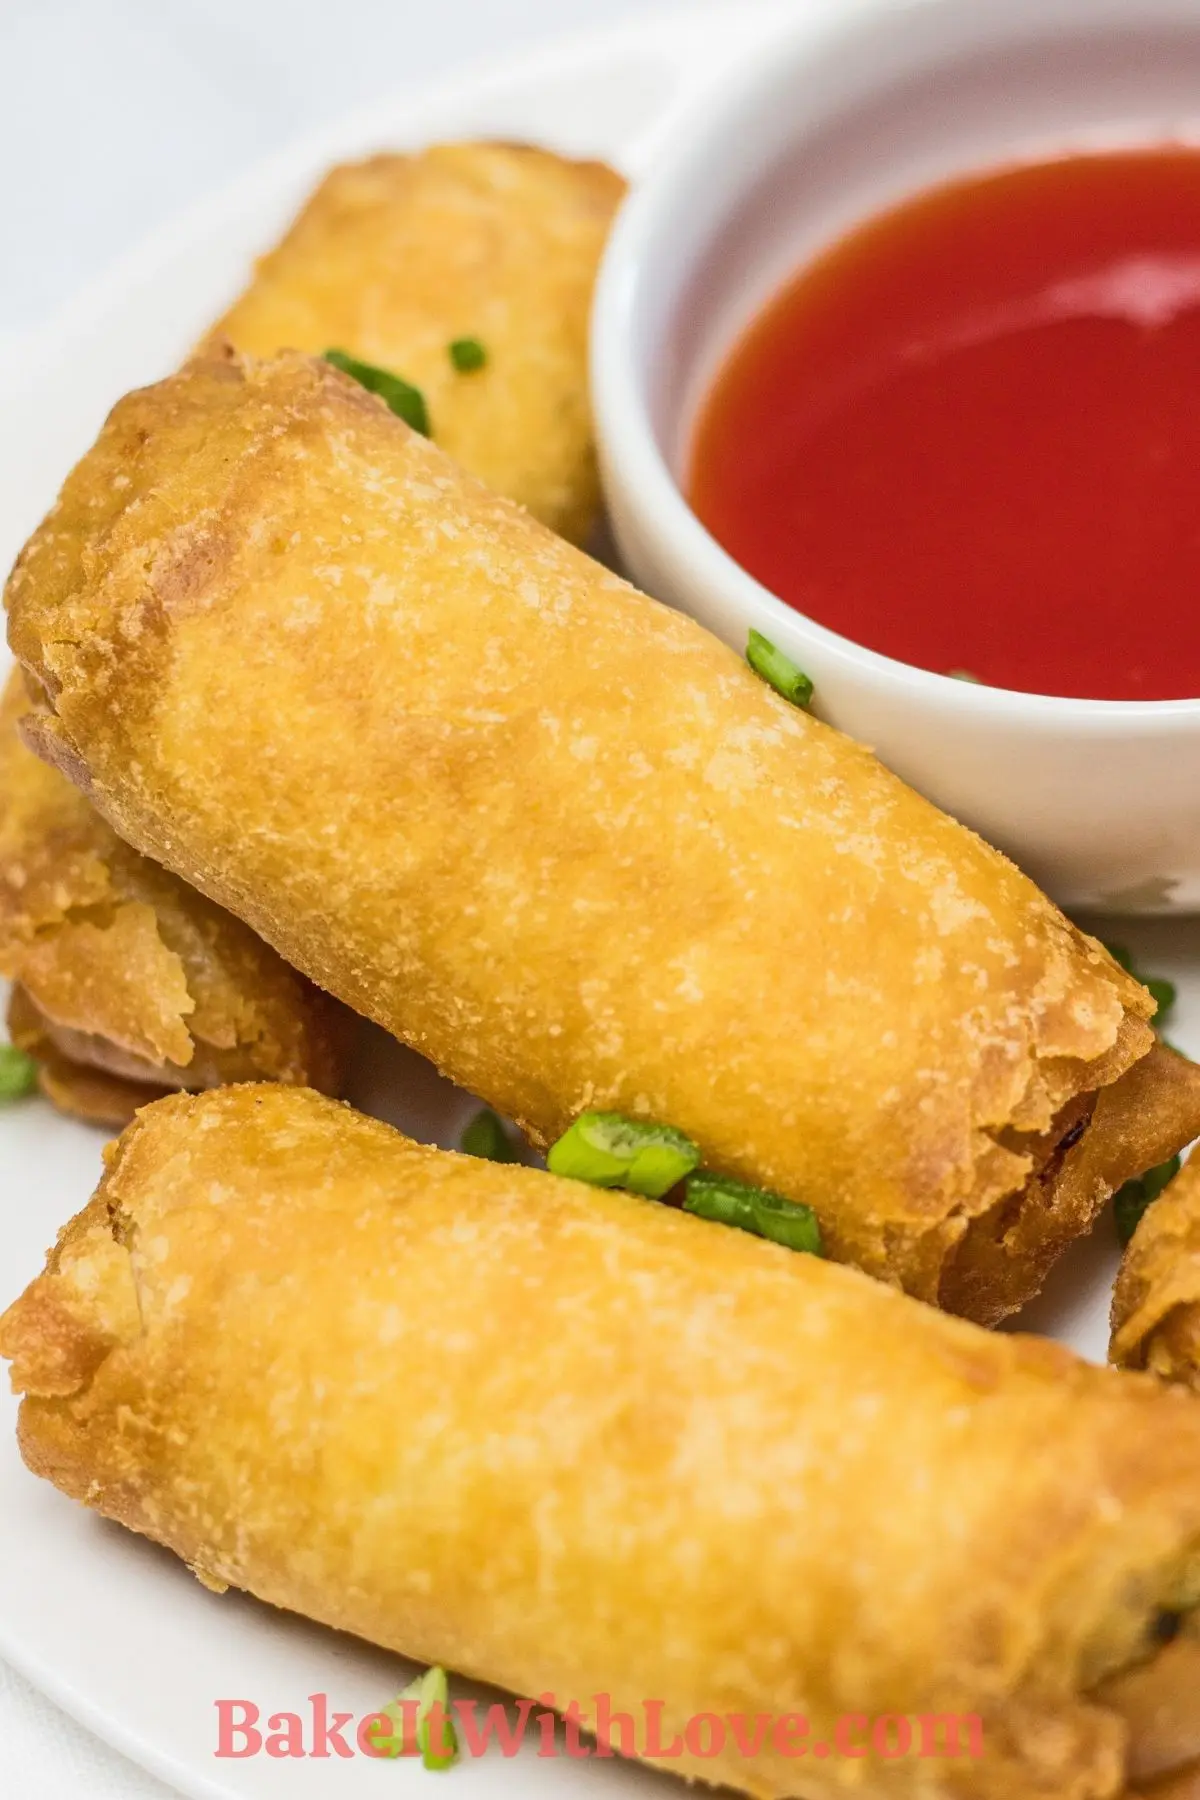 Frozen egg rolls after cooking in the air fryer served with sweet and sour sauce.